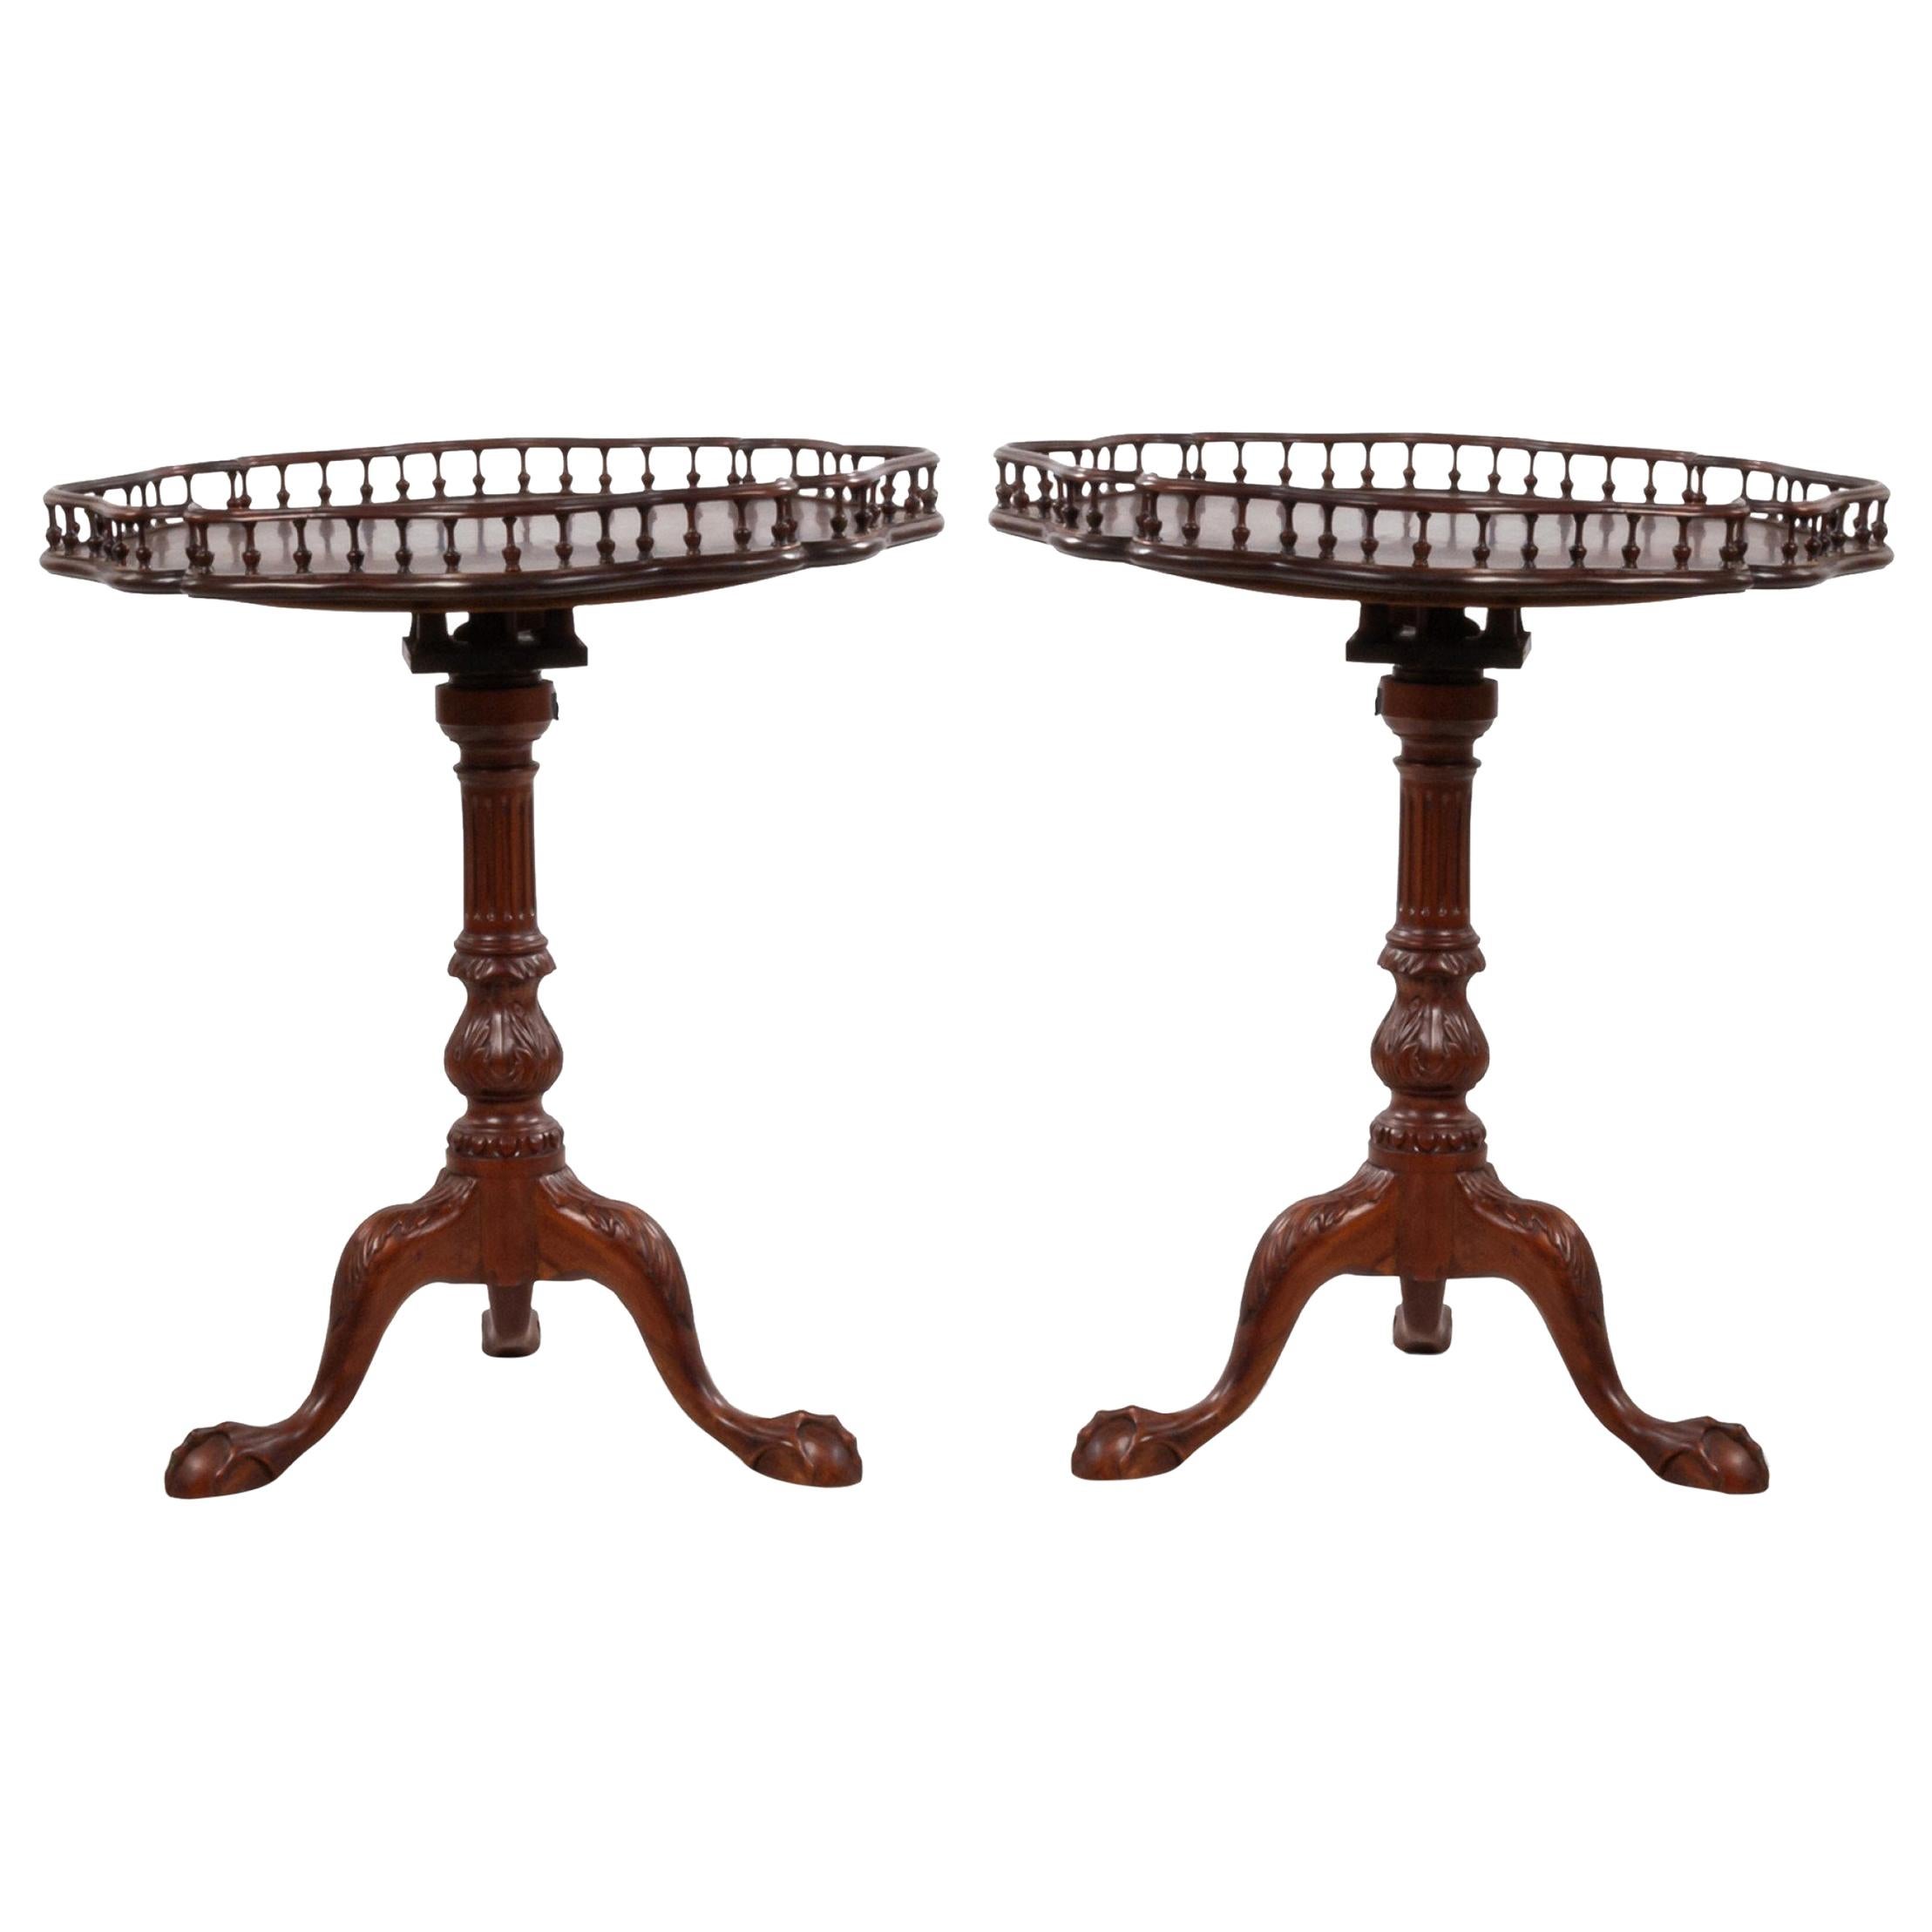 Mahogany Flip Top Side Tables with Gallery